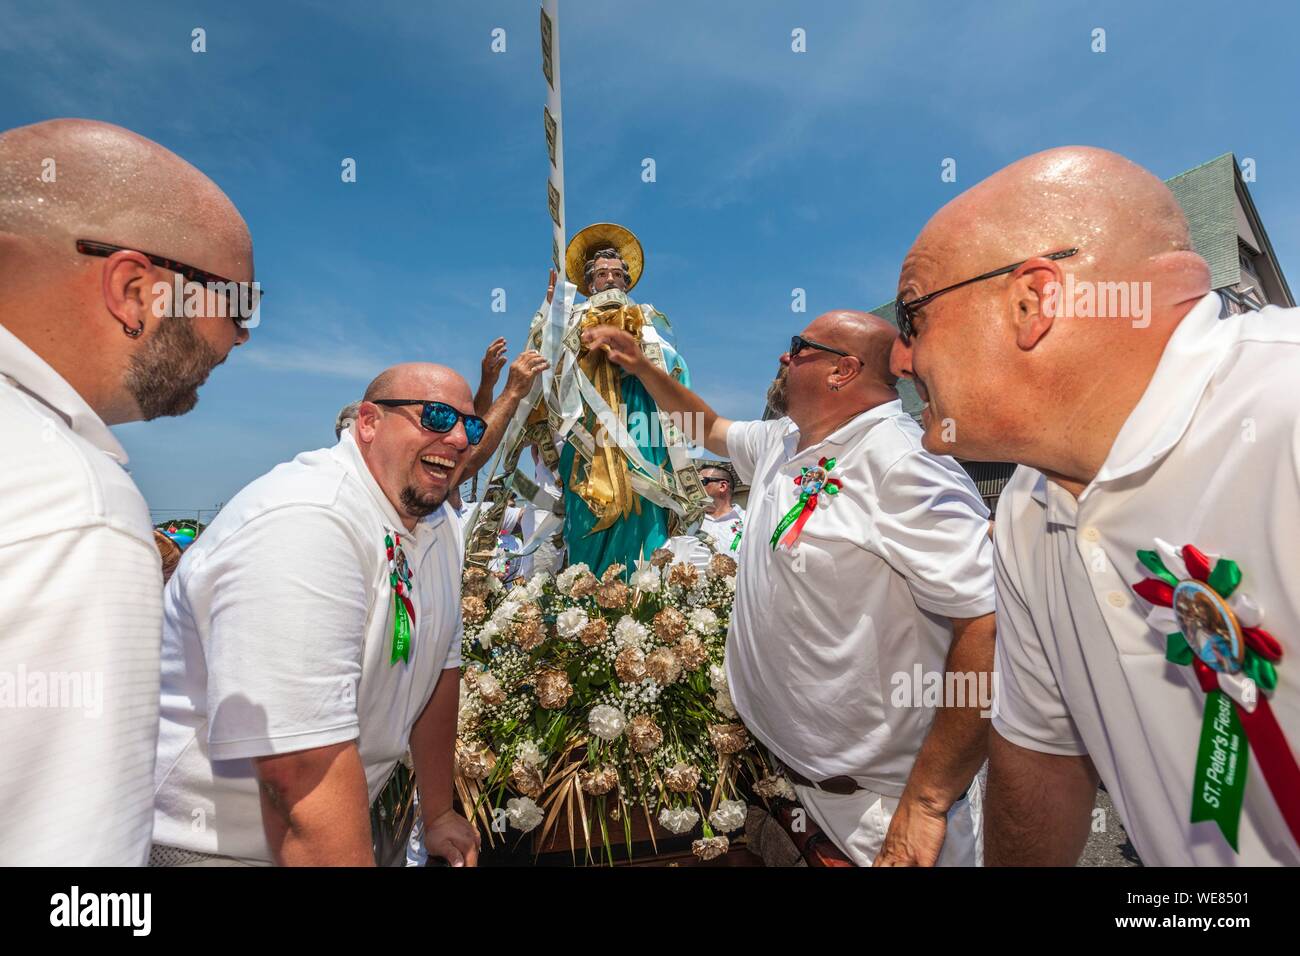 United States, New England, Massachusetts, Cape Ann, Gloucester, Saint Peters Fiesta, Traditional Italian Fishing Community Festival, men attaching ropes of money donations to the statue of St. Peter Stock Photo